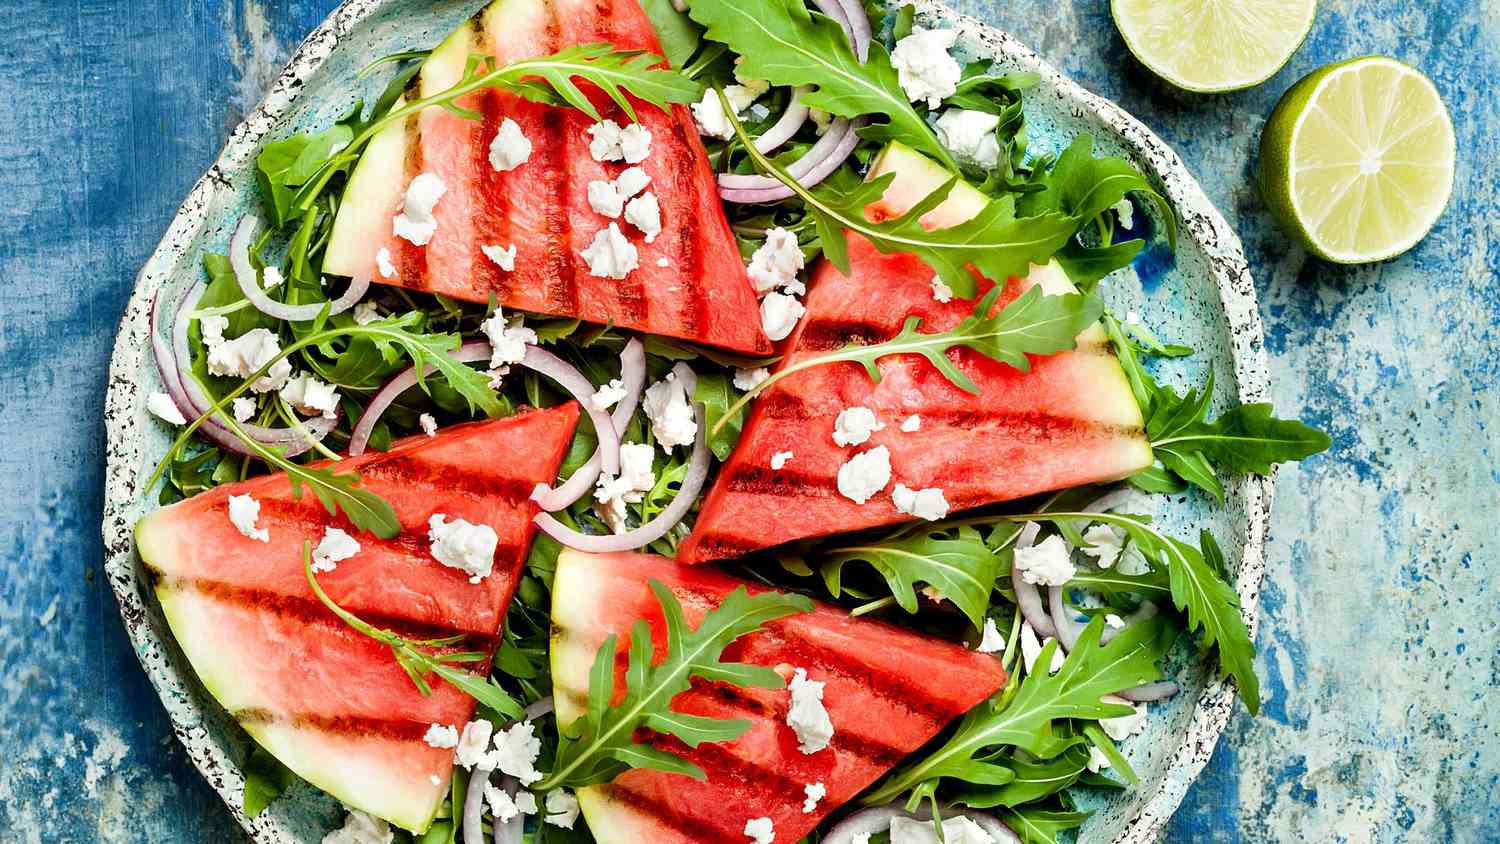 grilled food ideas: Fresh summer grilled watermelon salad with feta cheese, arugula, onions on blue background